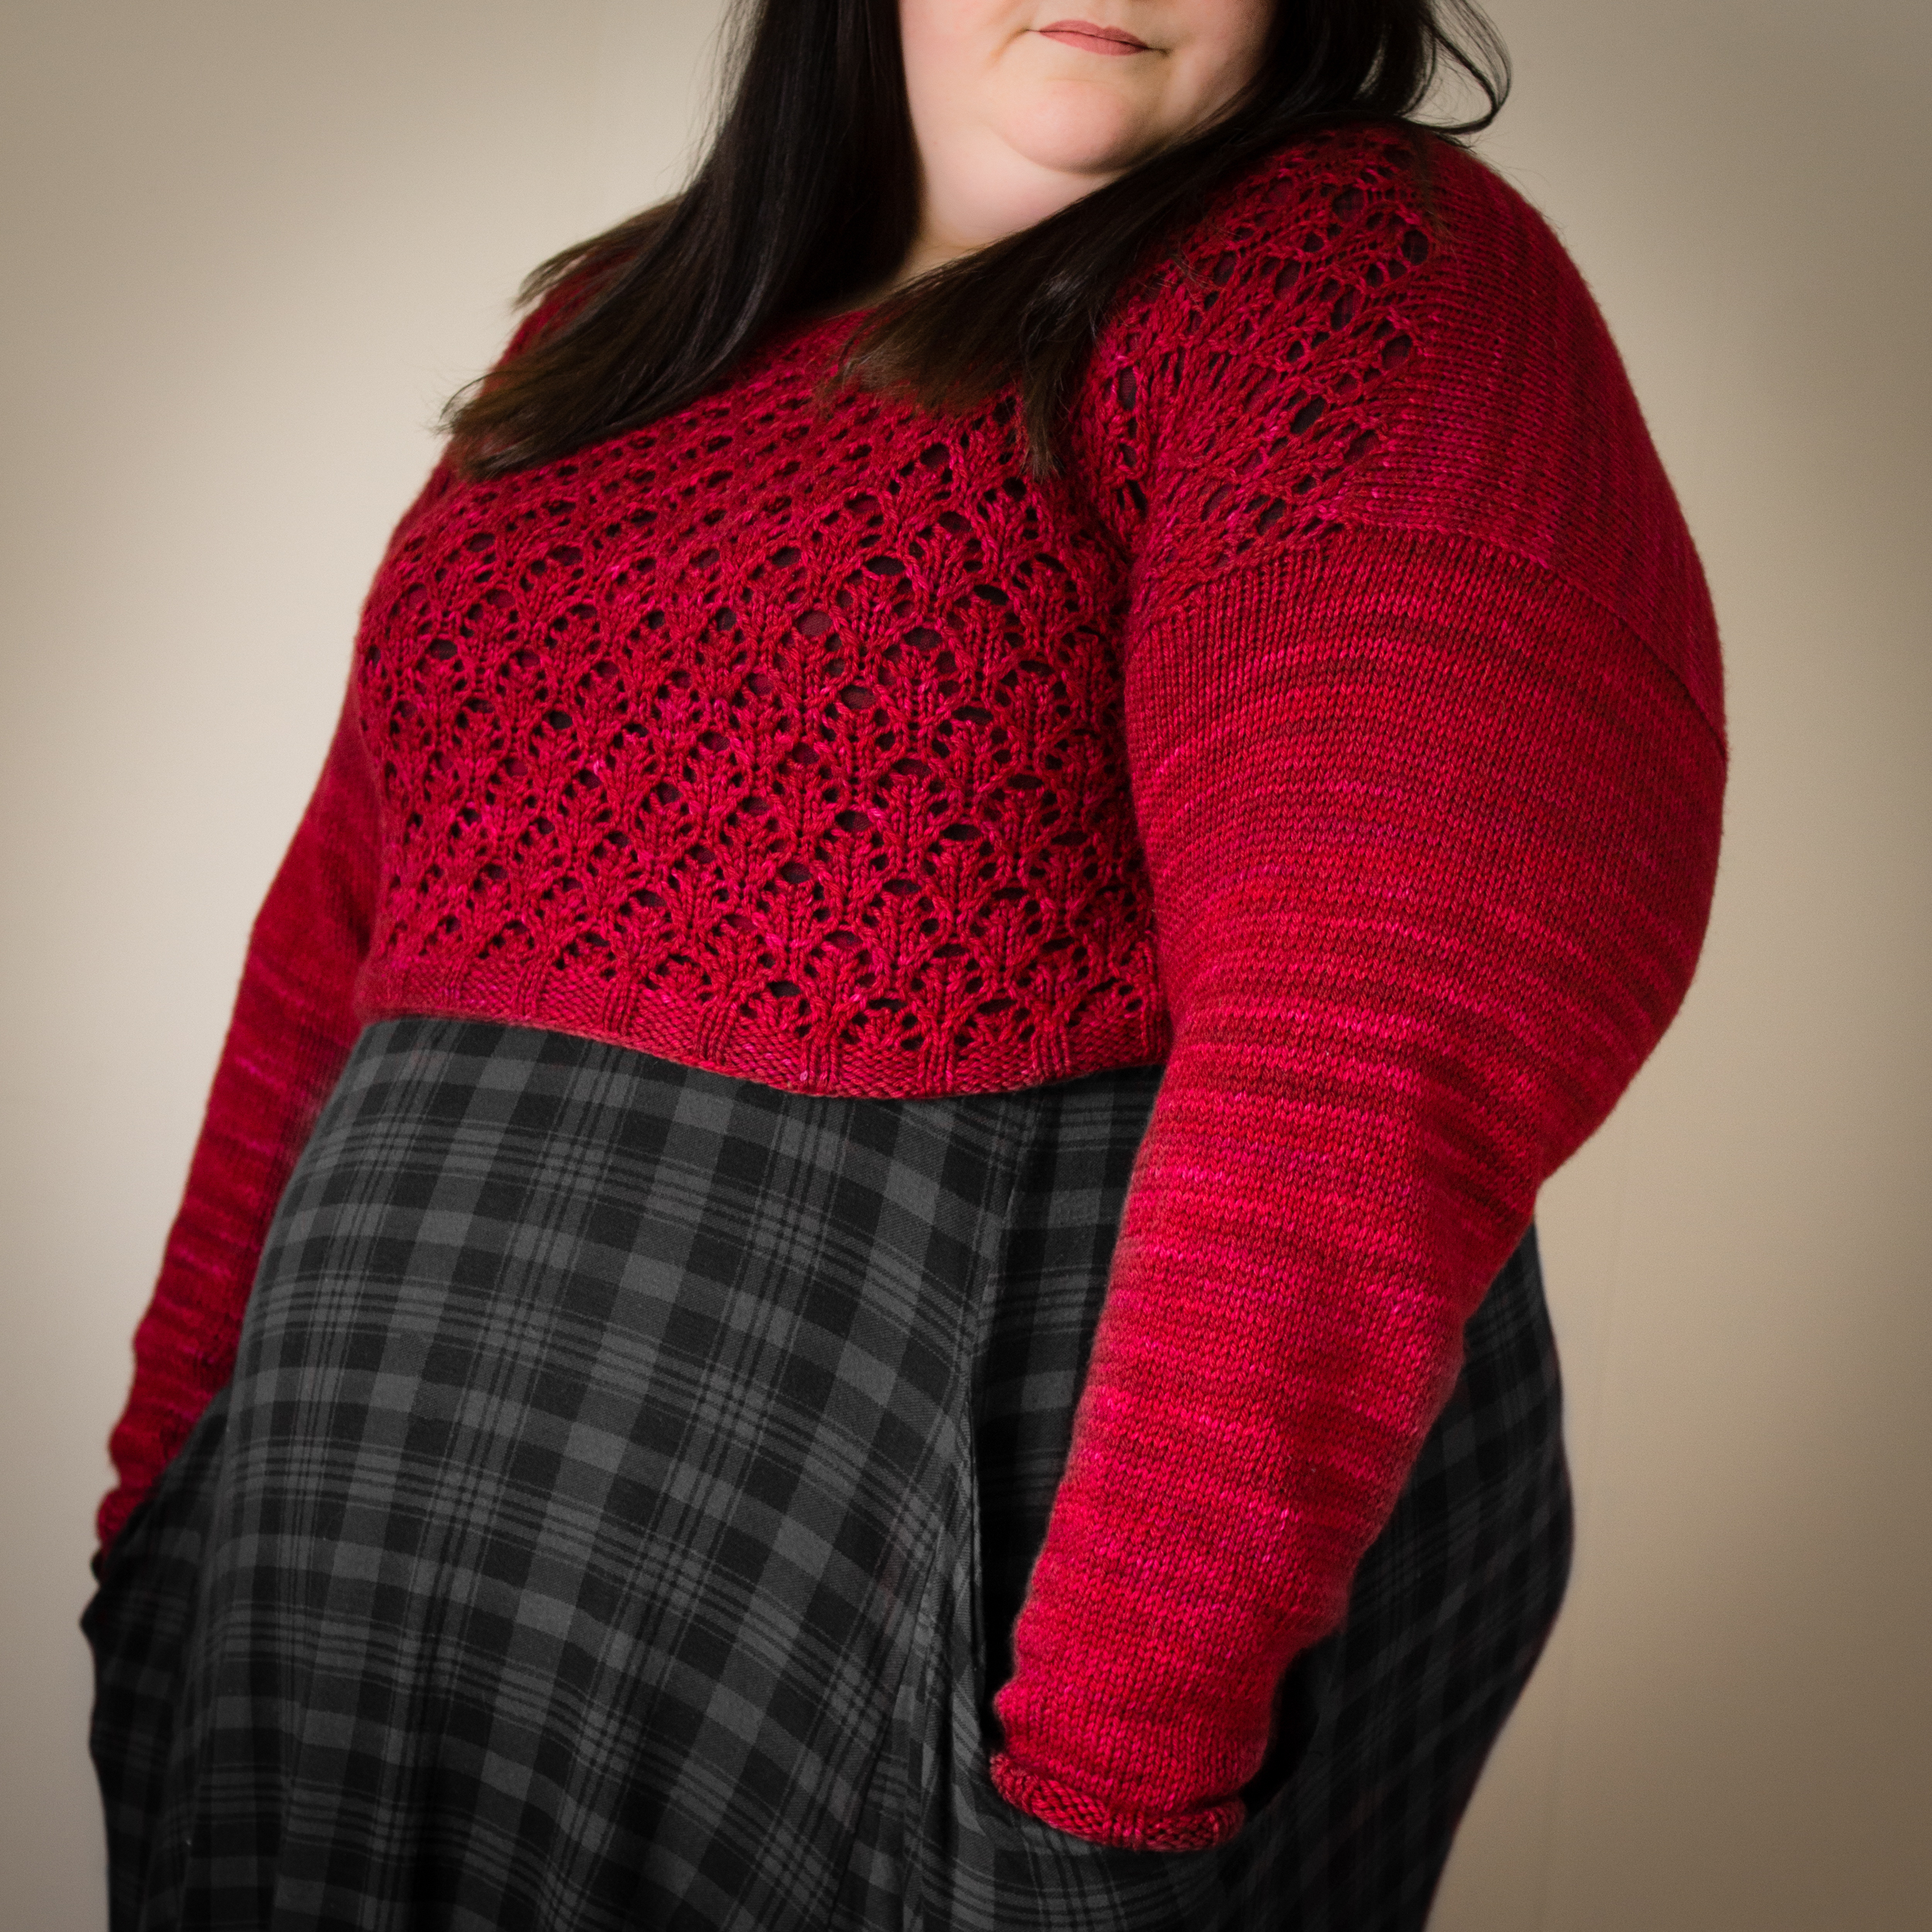 Designing for Fat Bodies - Victoria Marchant Knits